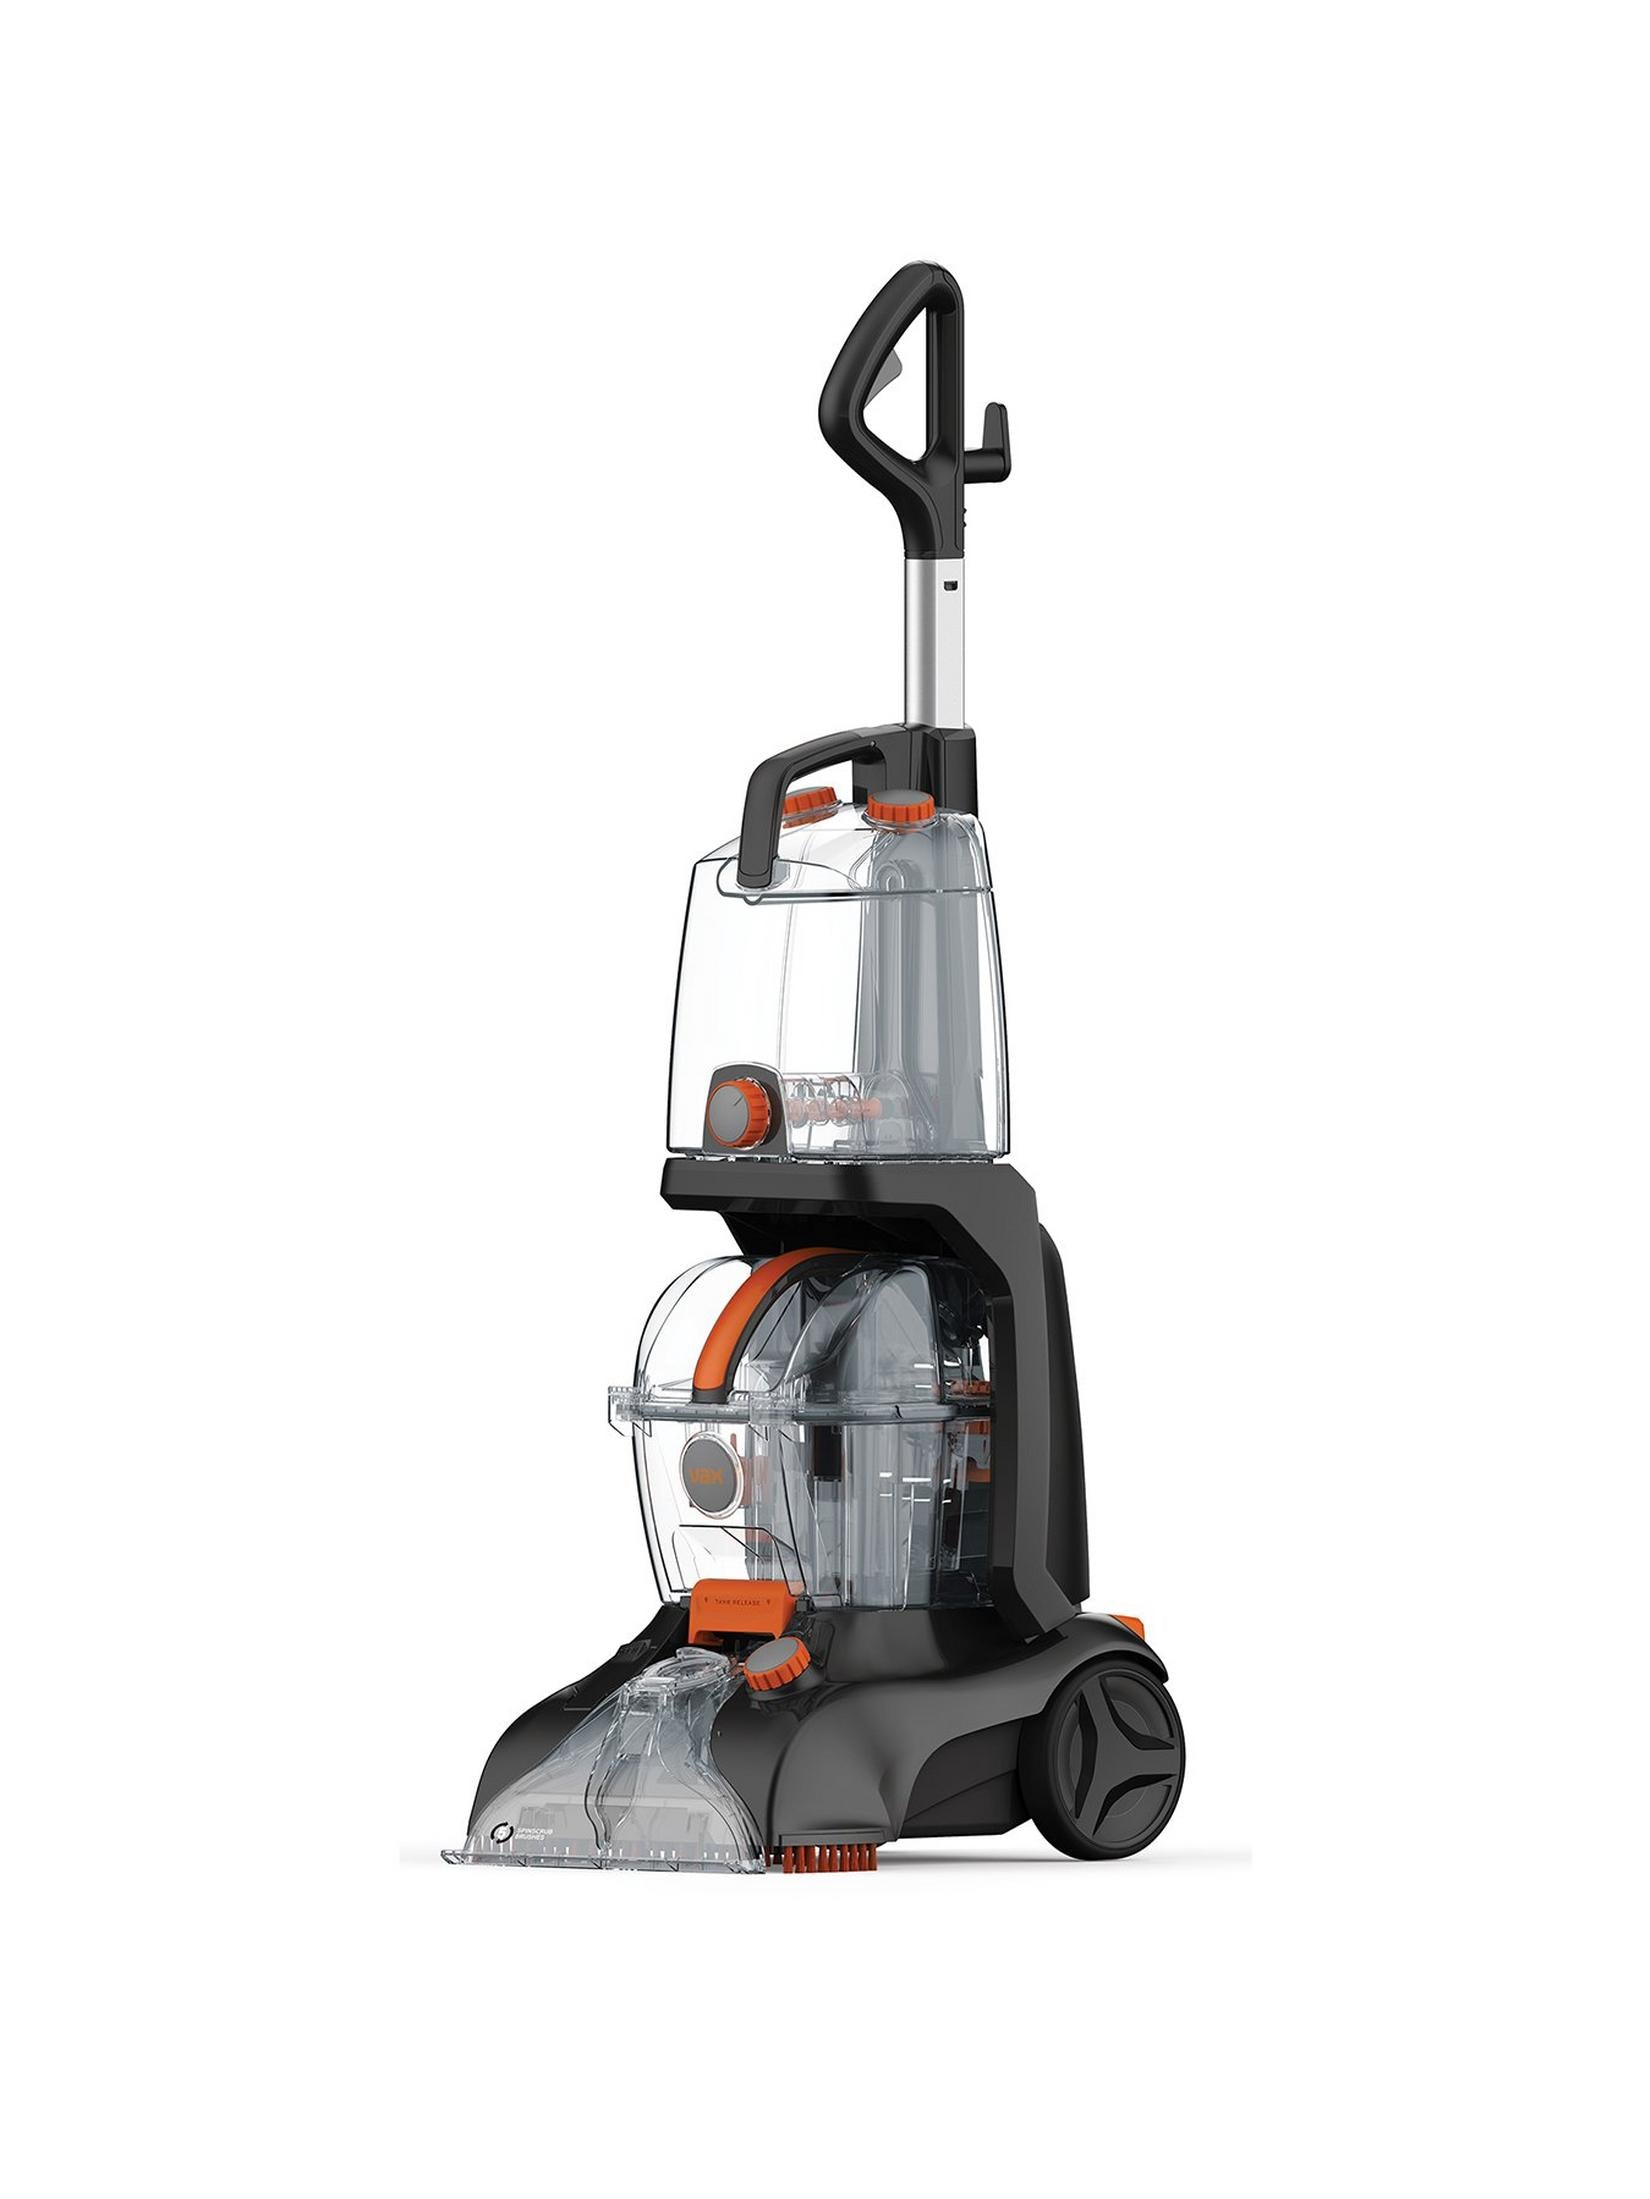 Vax Rapid Power Revive Carpet Washer